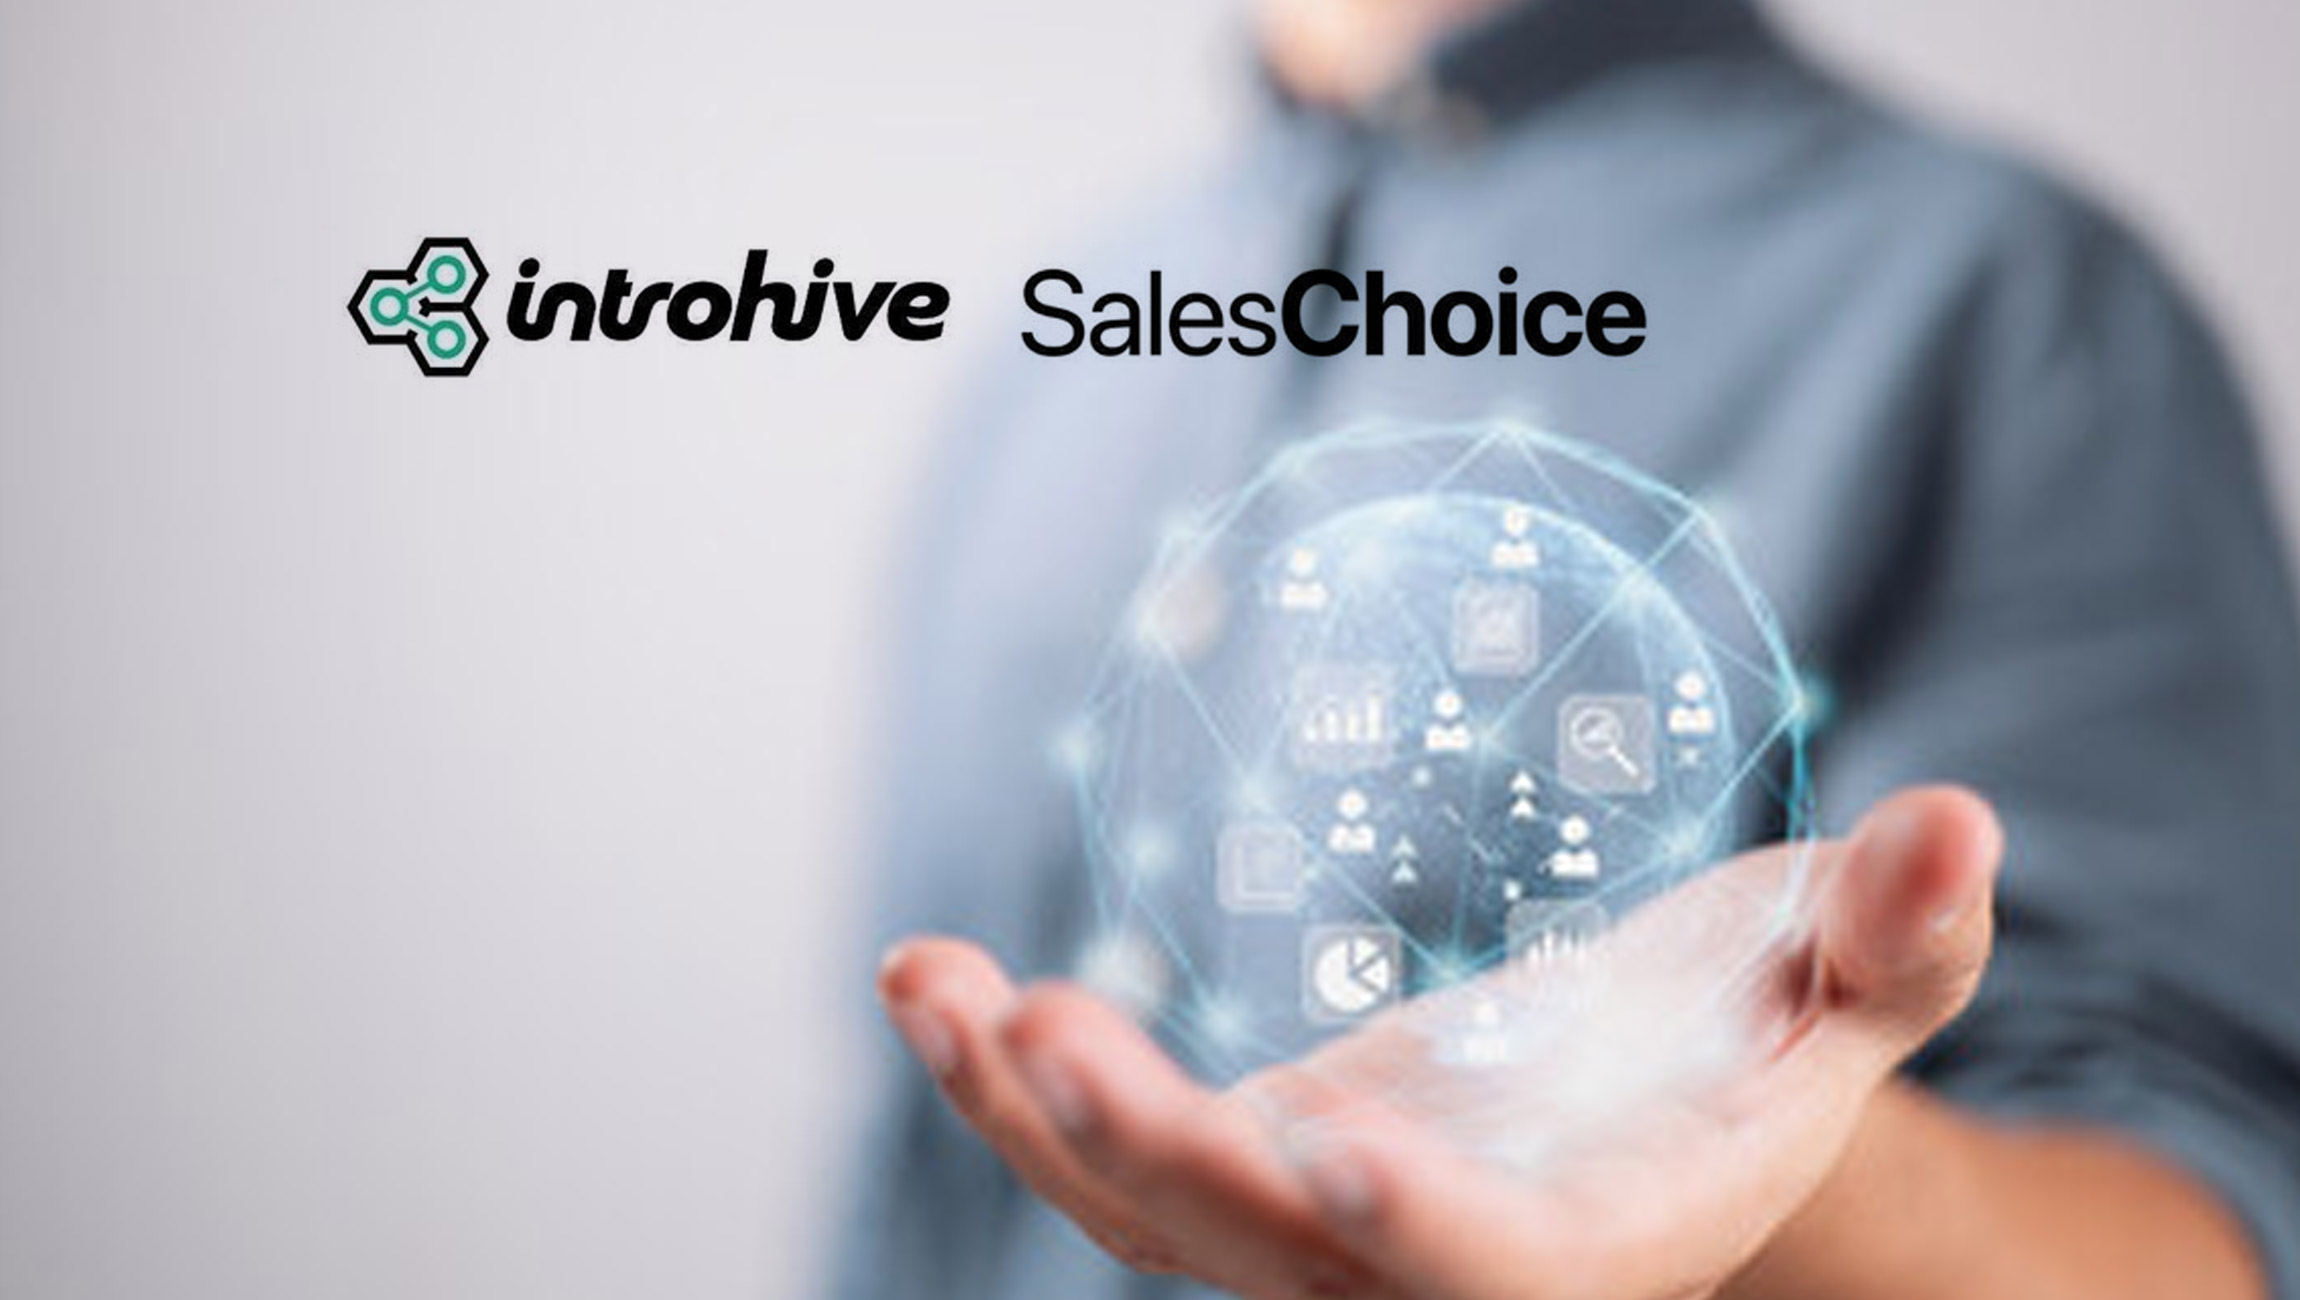 Introhive and SalesChoice Join Forces to Provide a Holistic View of Customer Intelligence and Sales Forecasting Within the Salesforce Ecosystem